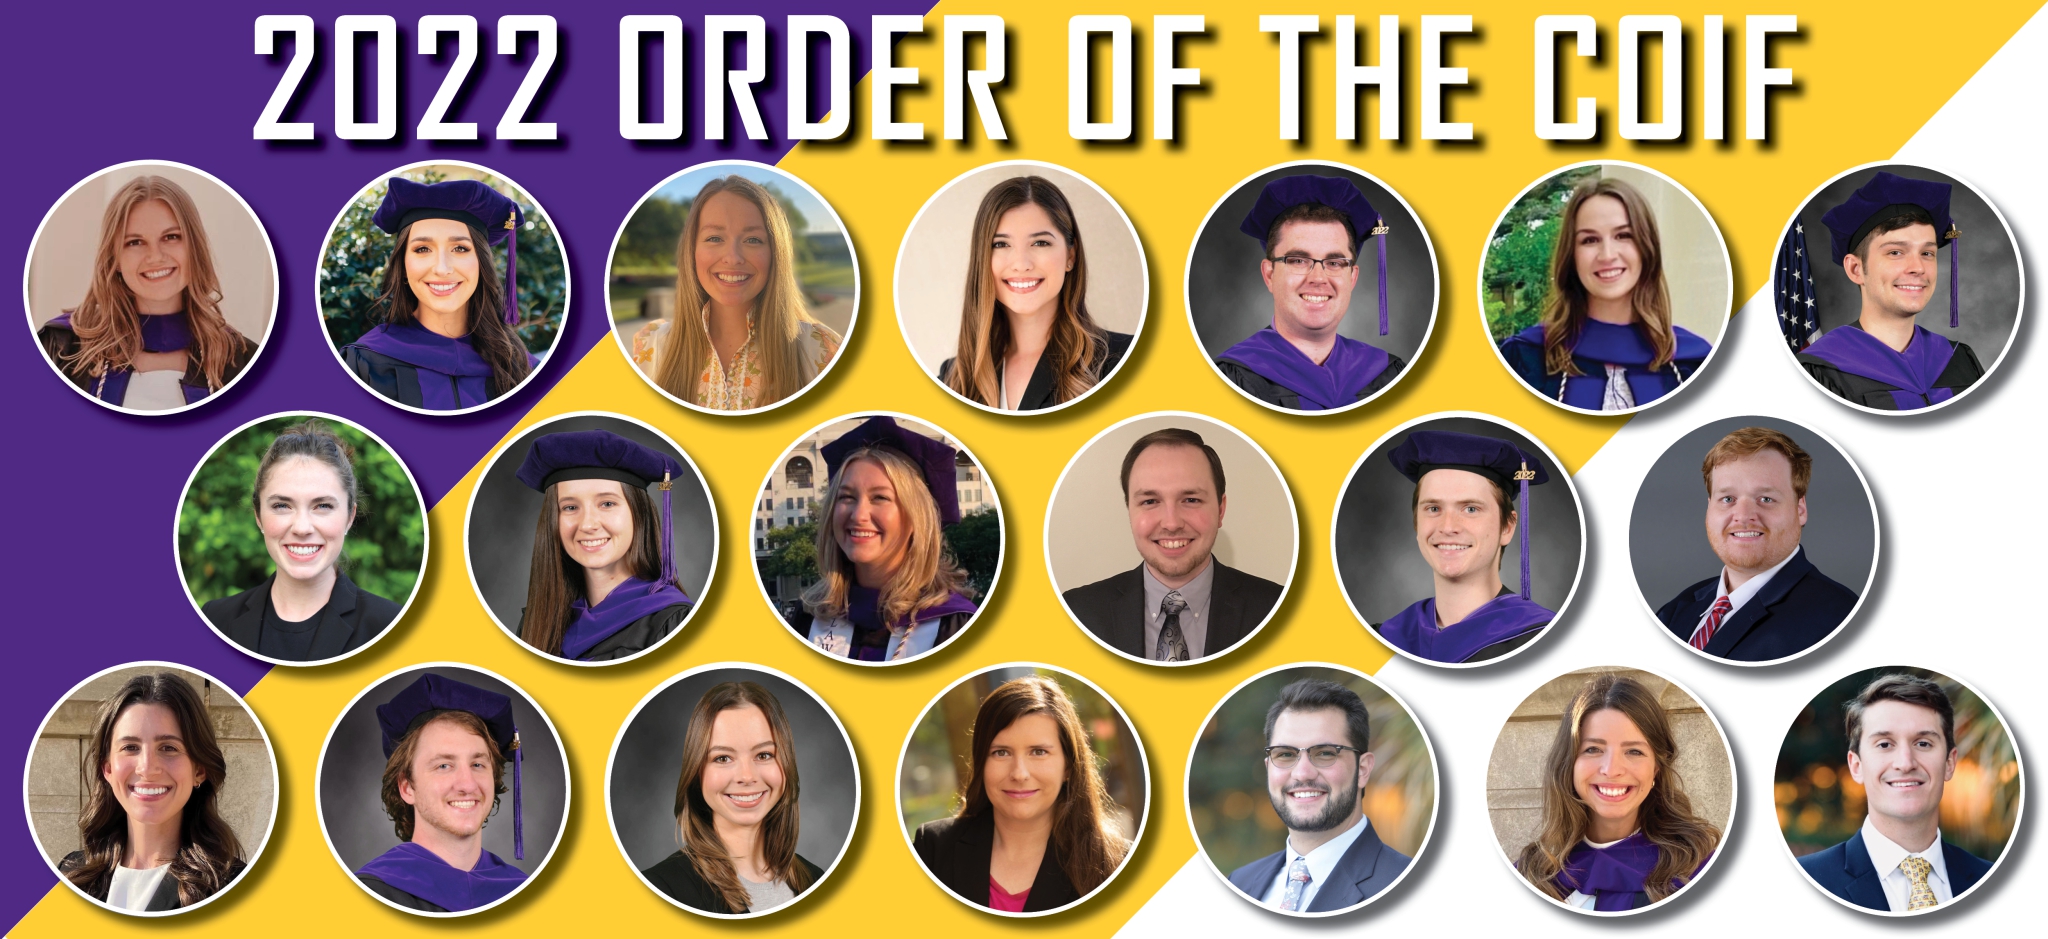 20 LSU Law Class of 2022 graduates selected for highest honor a law